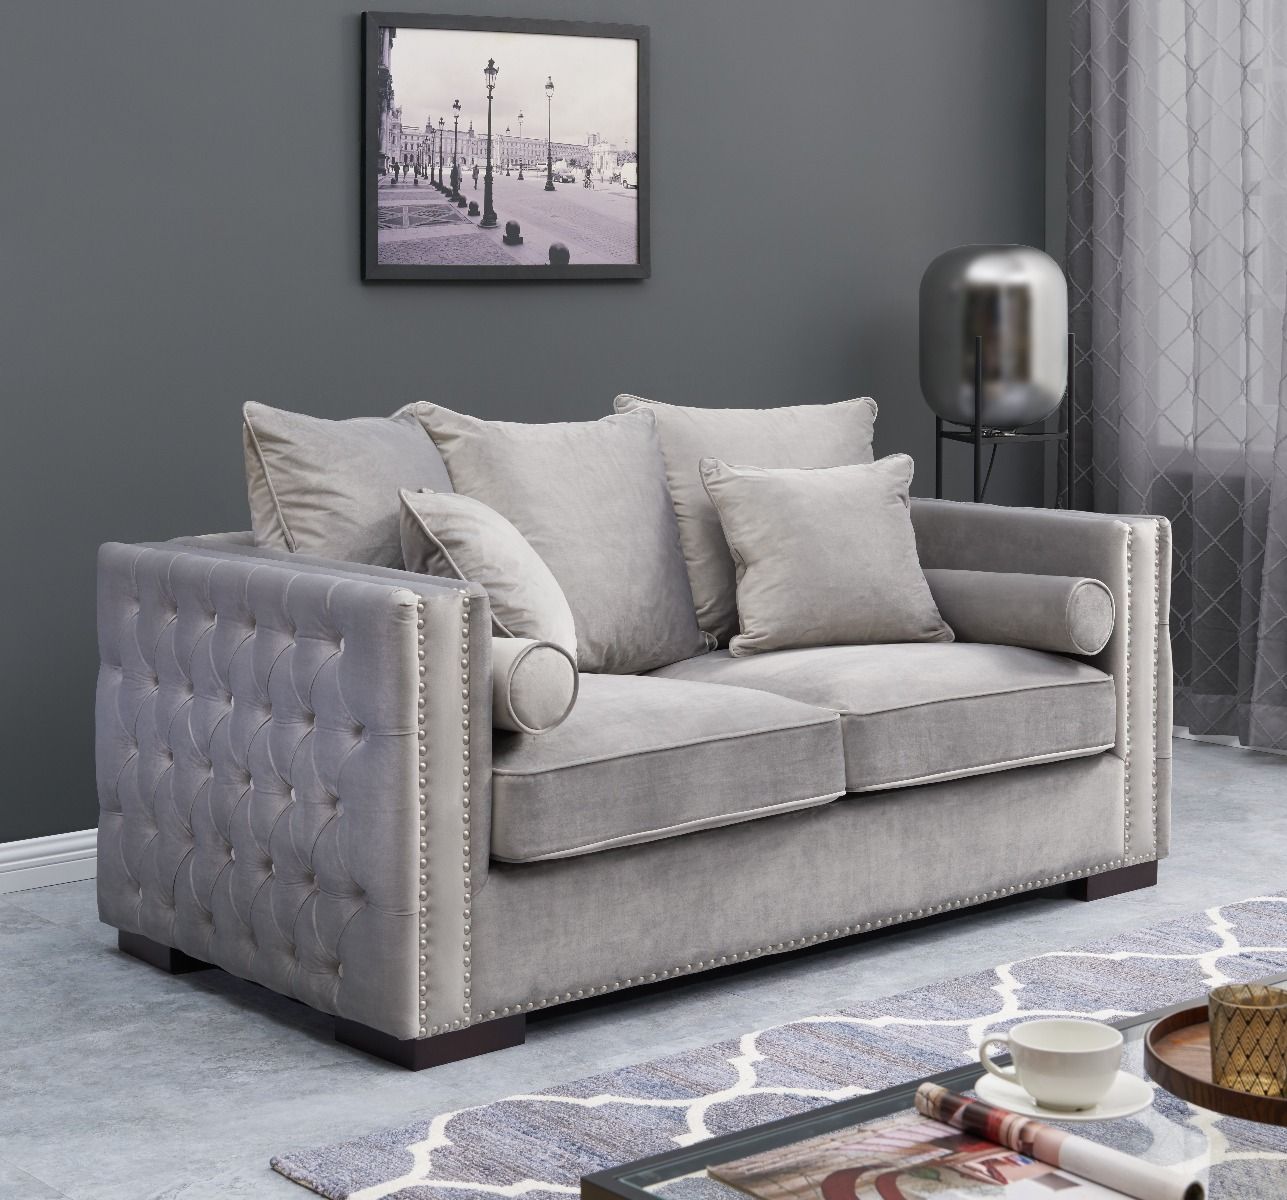 Moscow 2 Seater Sofa - Silver